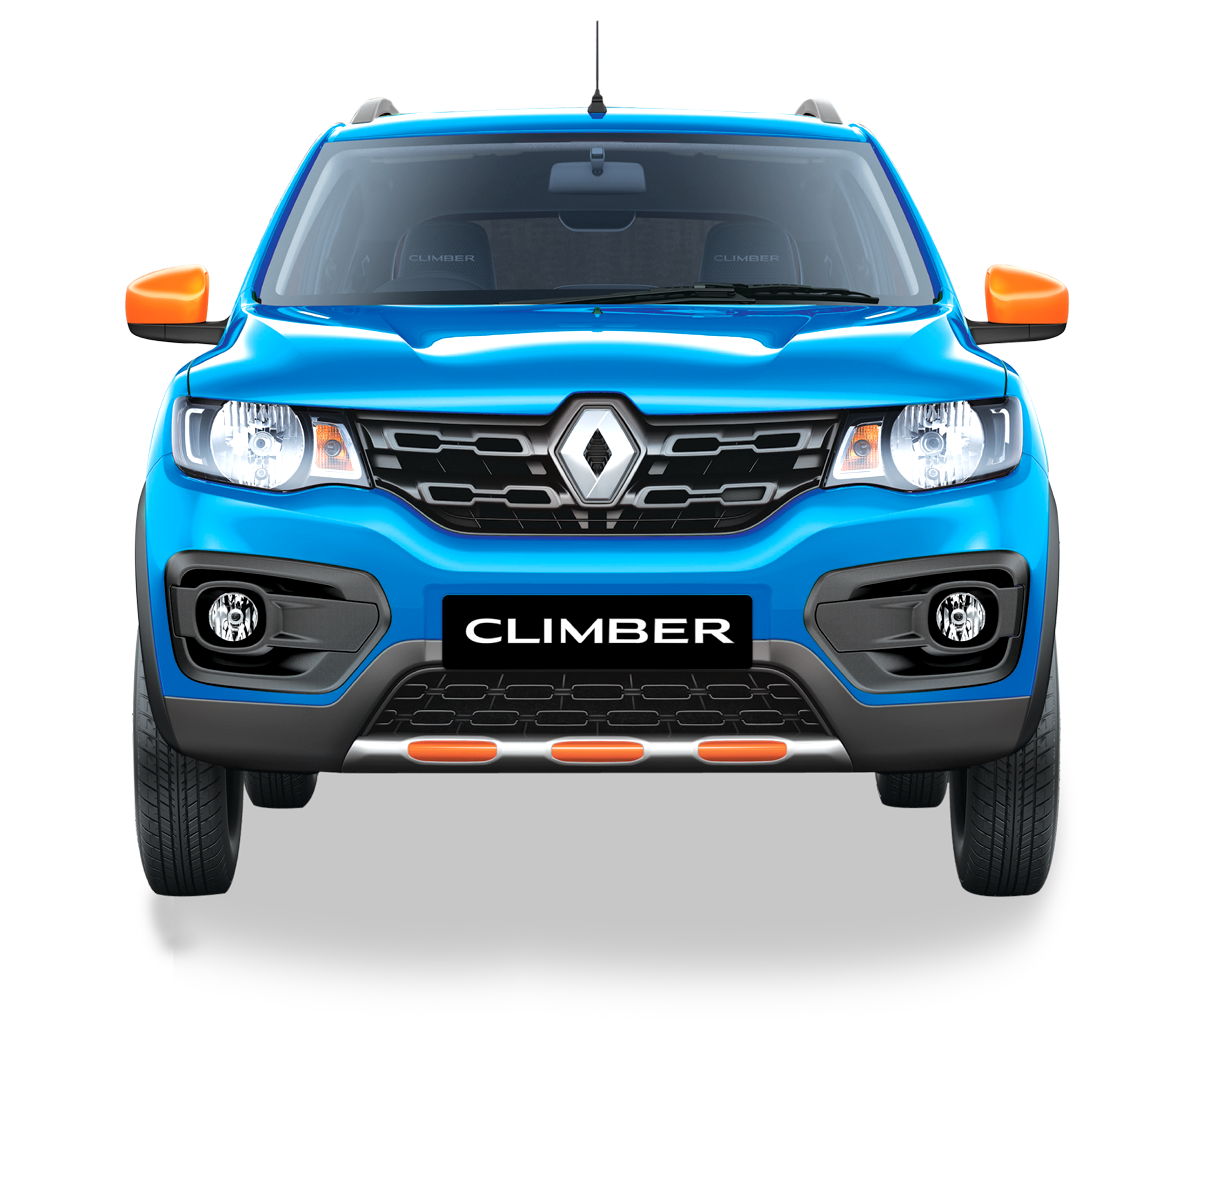 Renault PNG Images HD